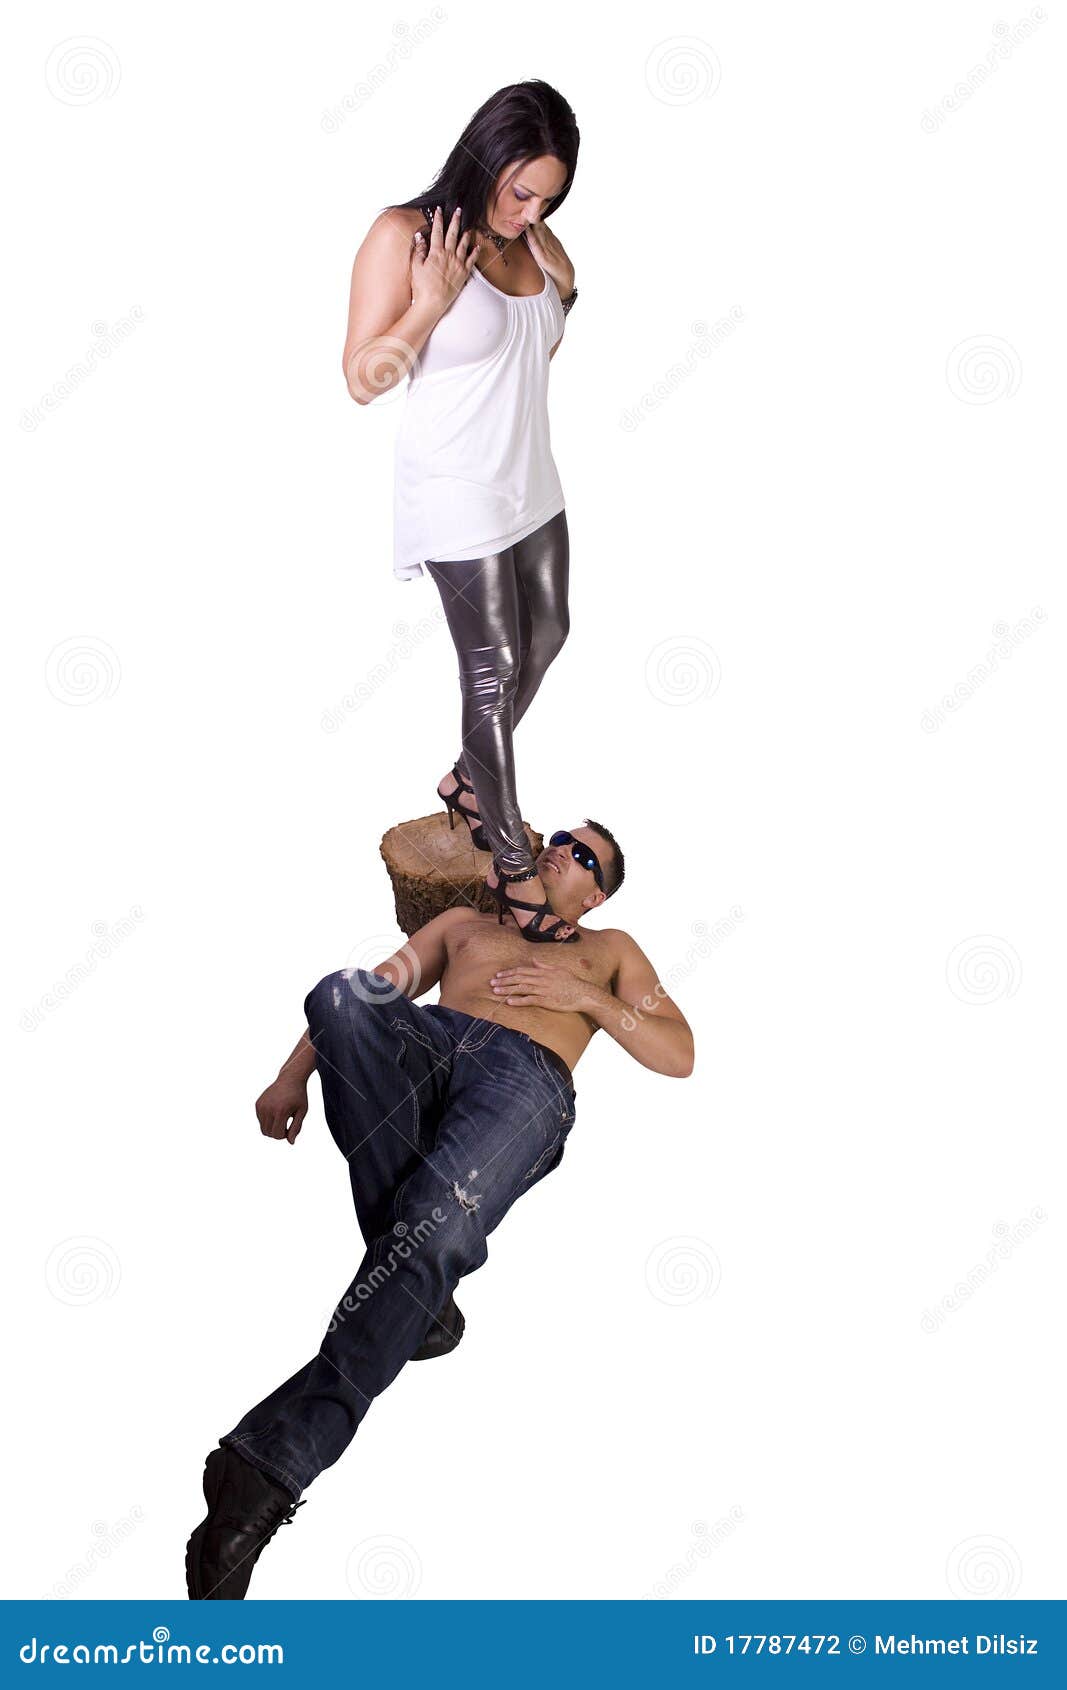 image of a woman dominating over man- isolated.